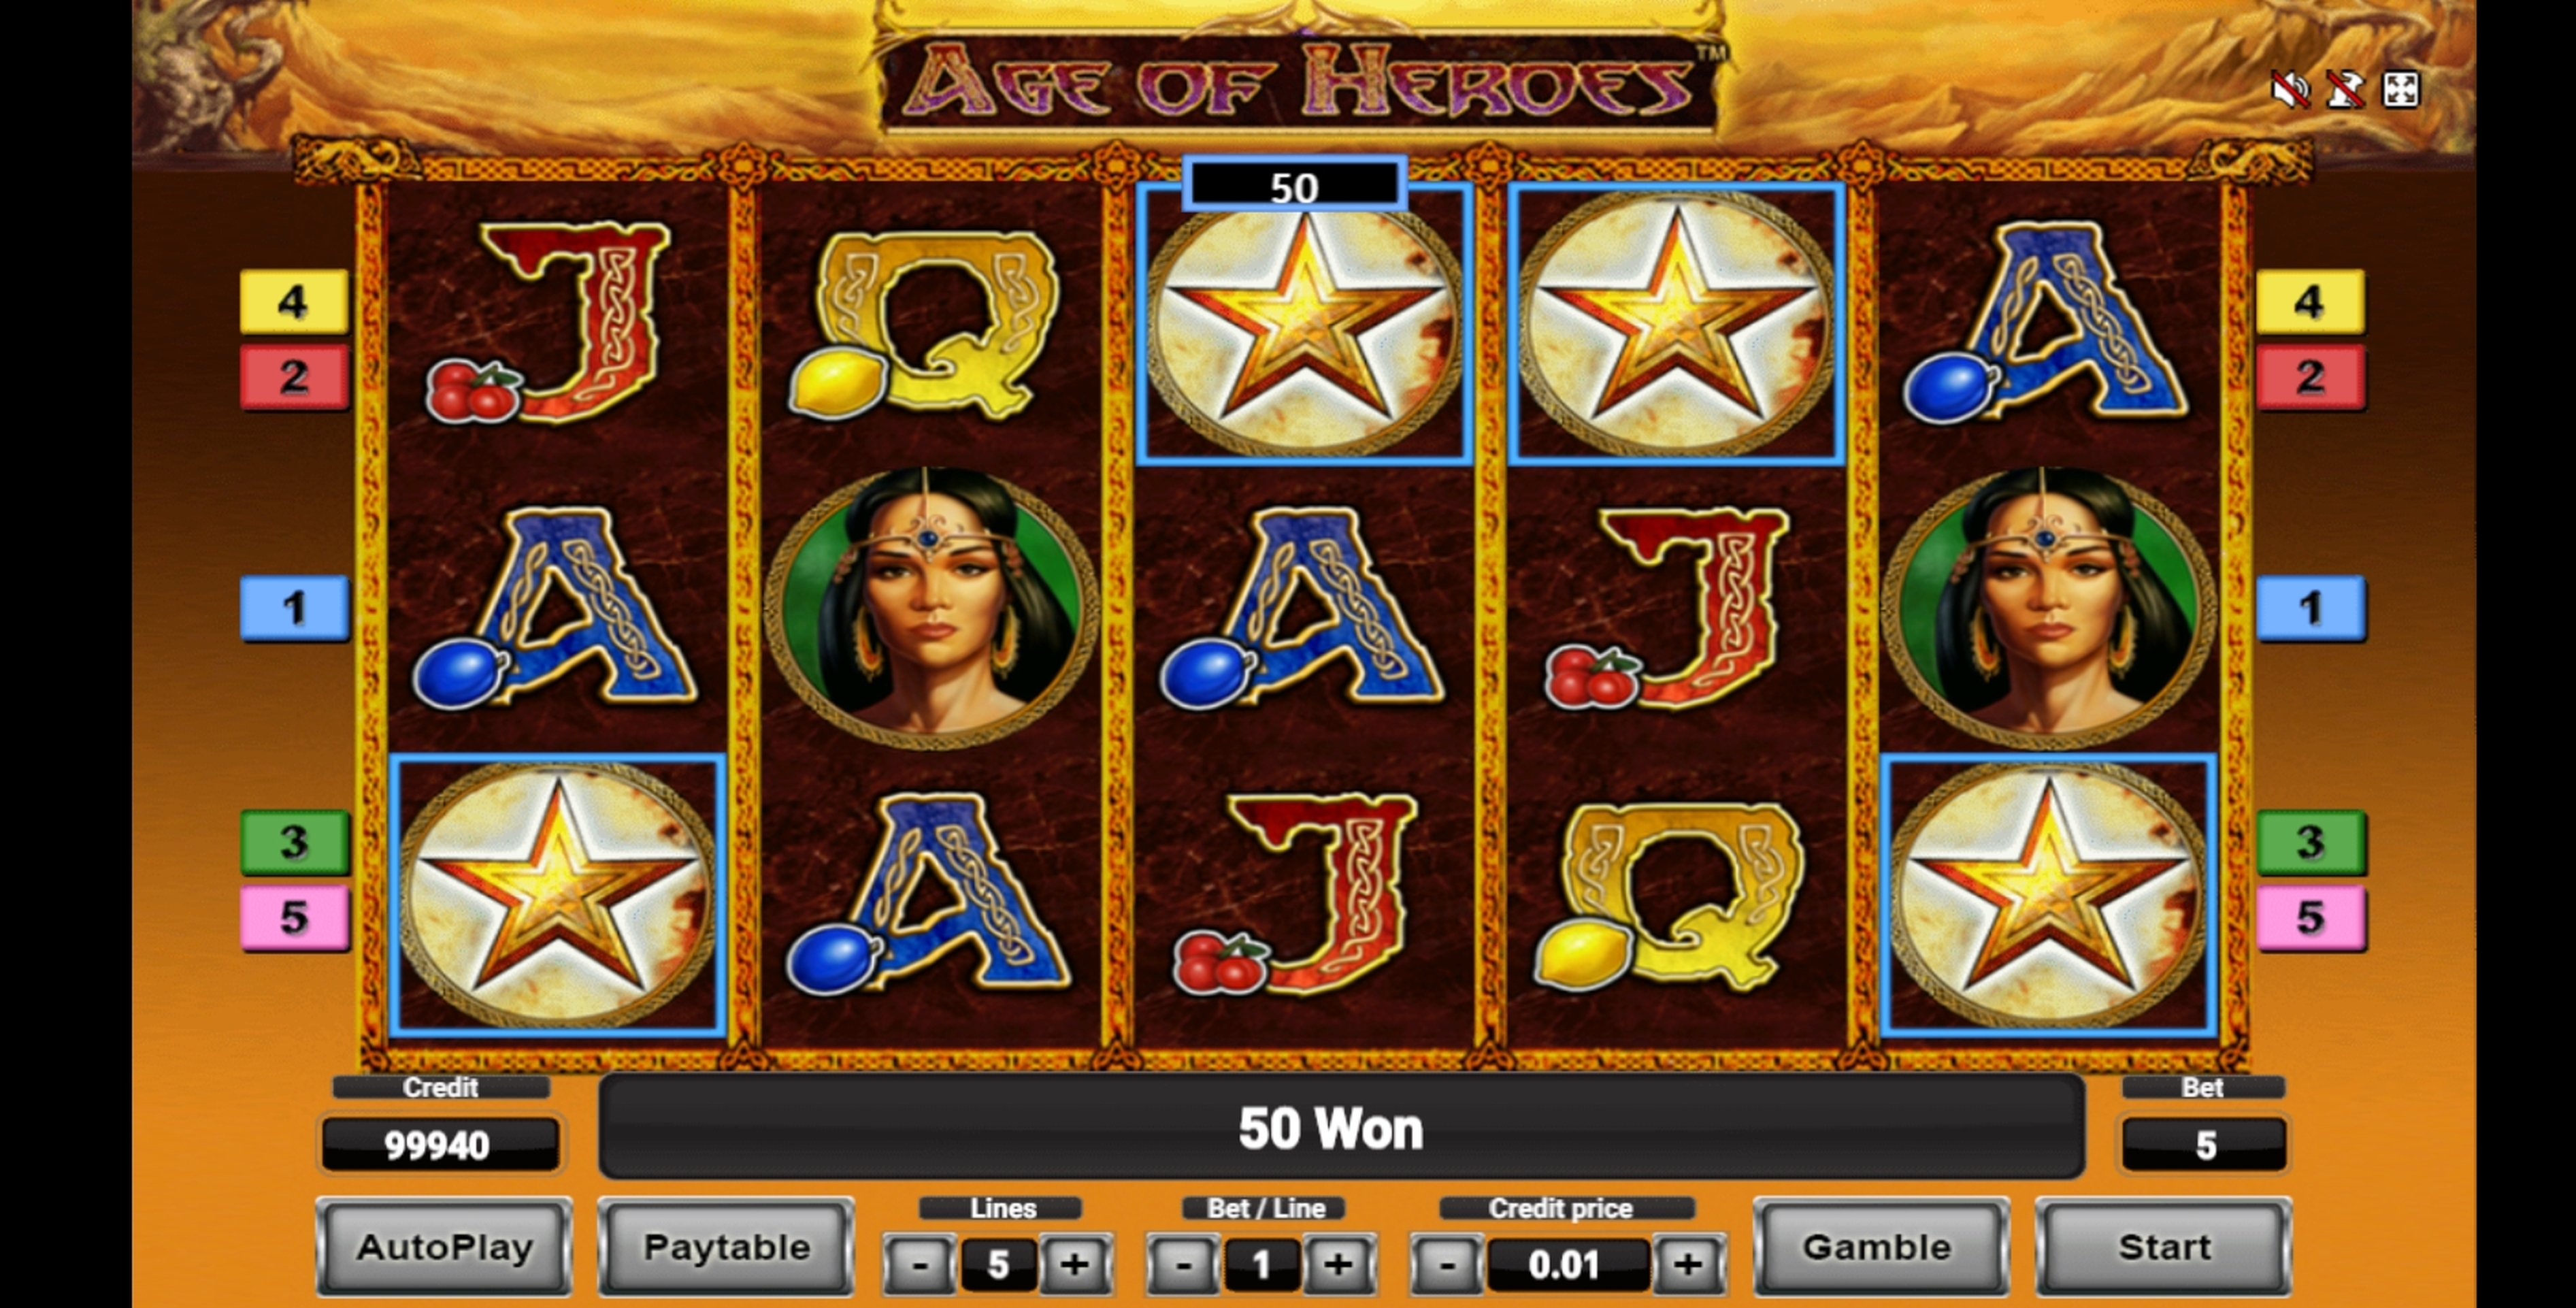 Win Money in Age Of Heroes Deluxe Free Slot Game by Novomatic